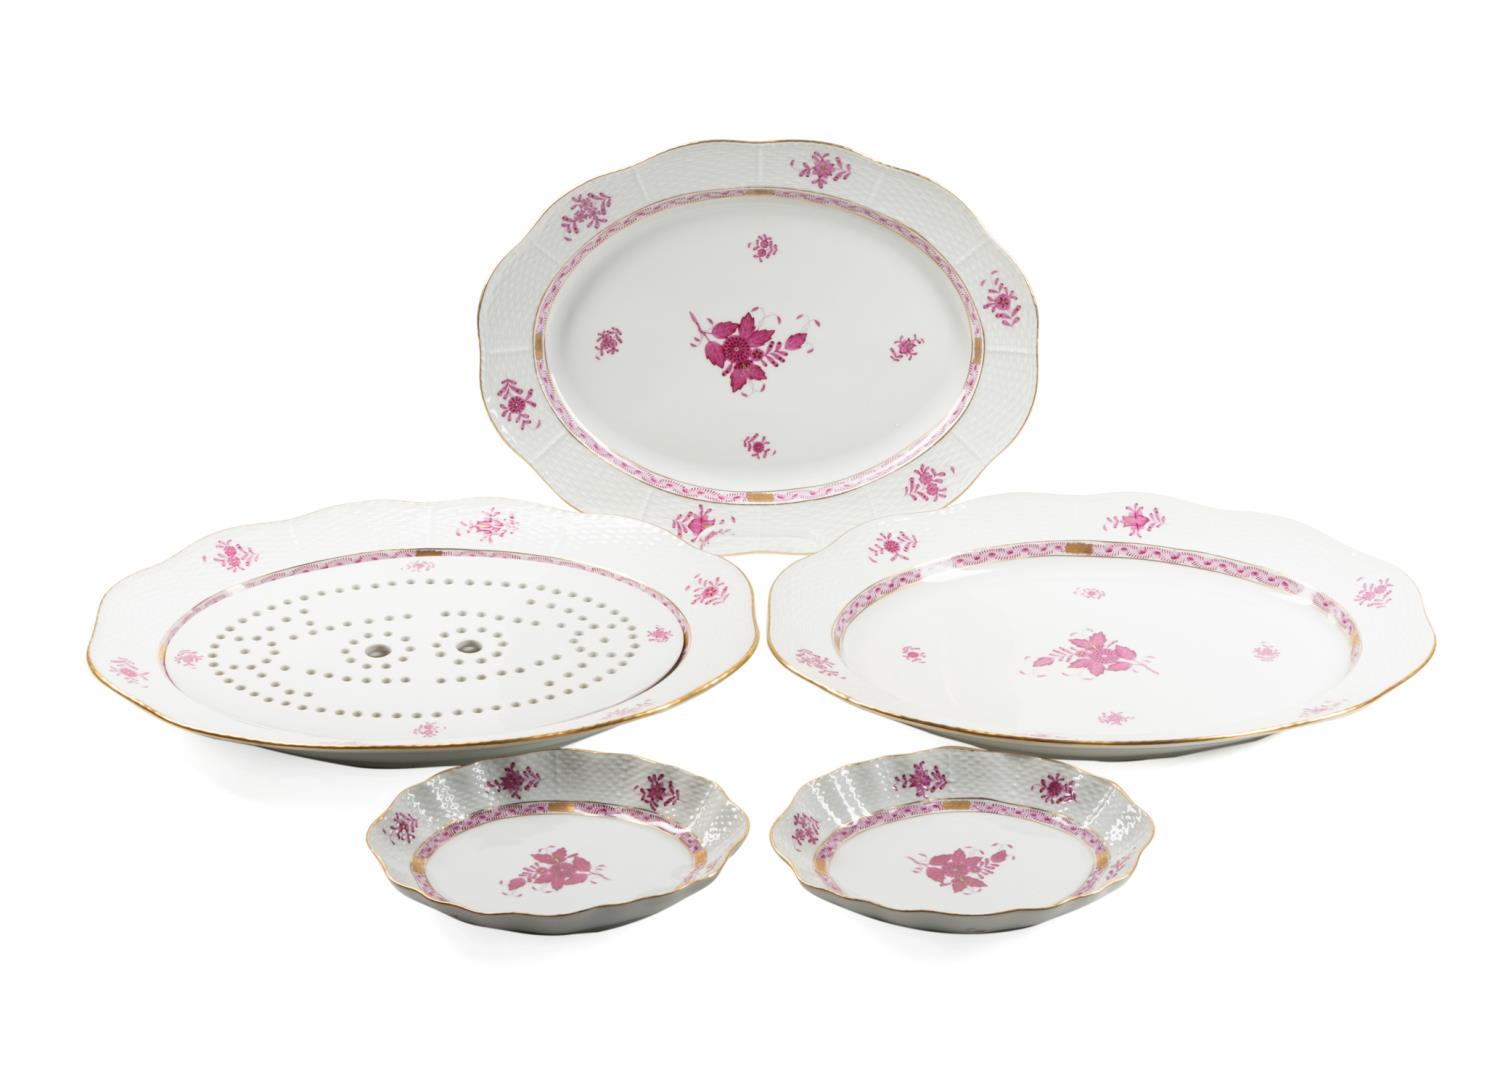 6PCS HEREND CHINESE BOUQUET PLATTERS 354c6e